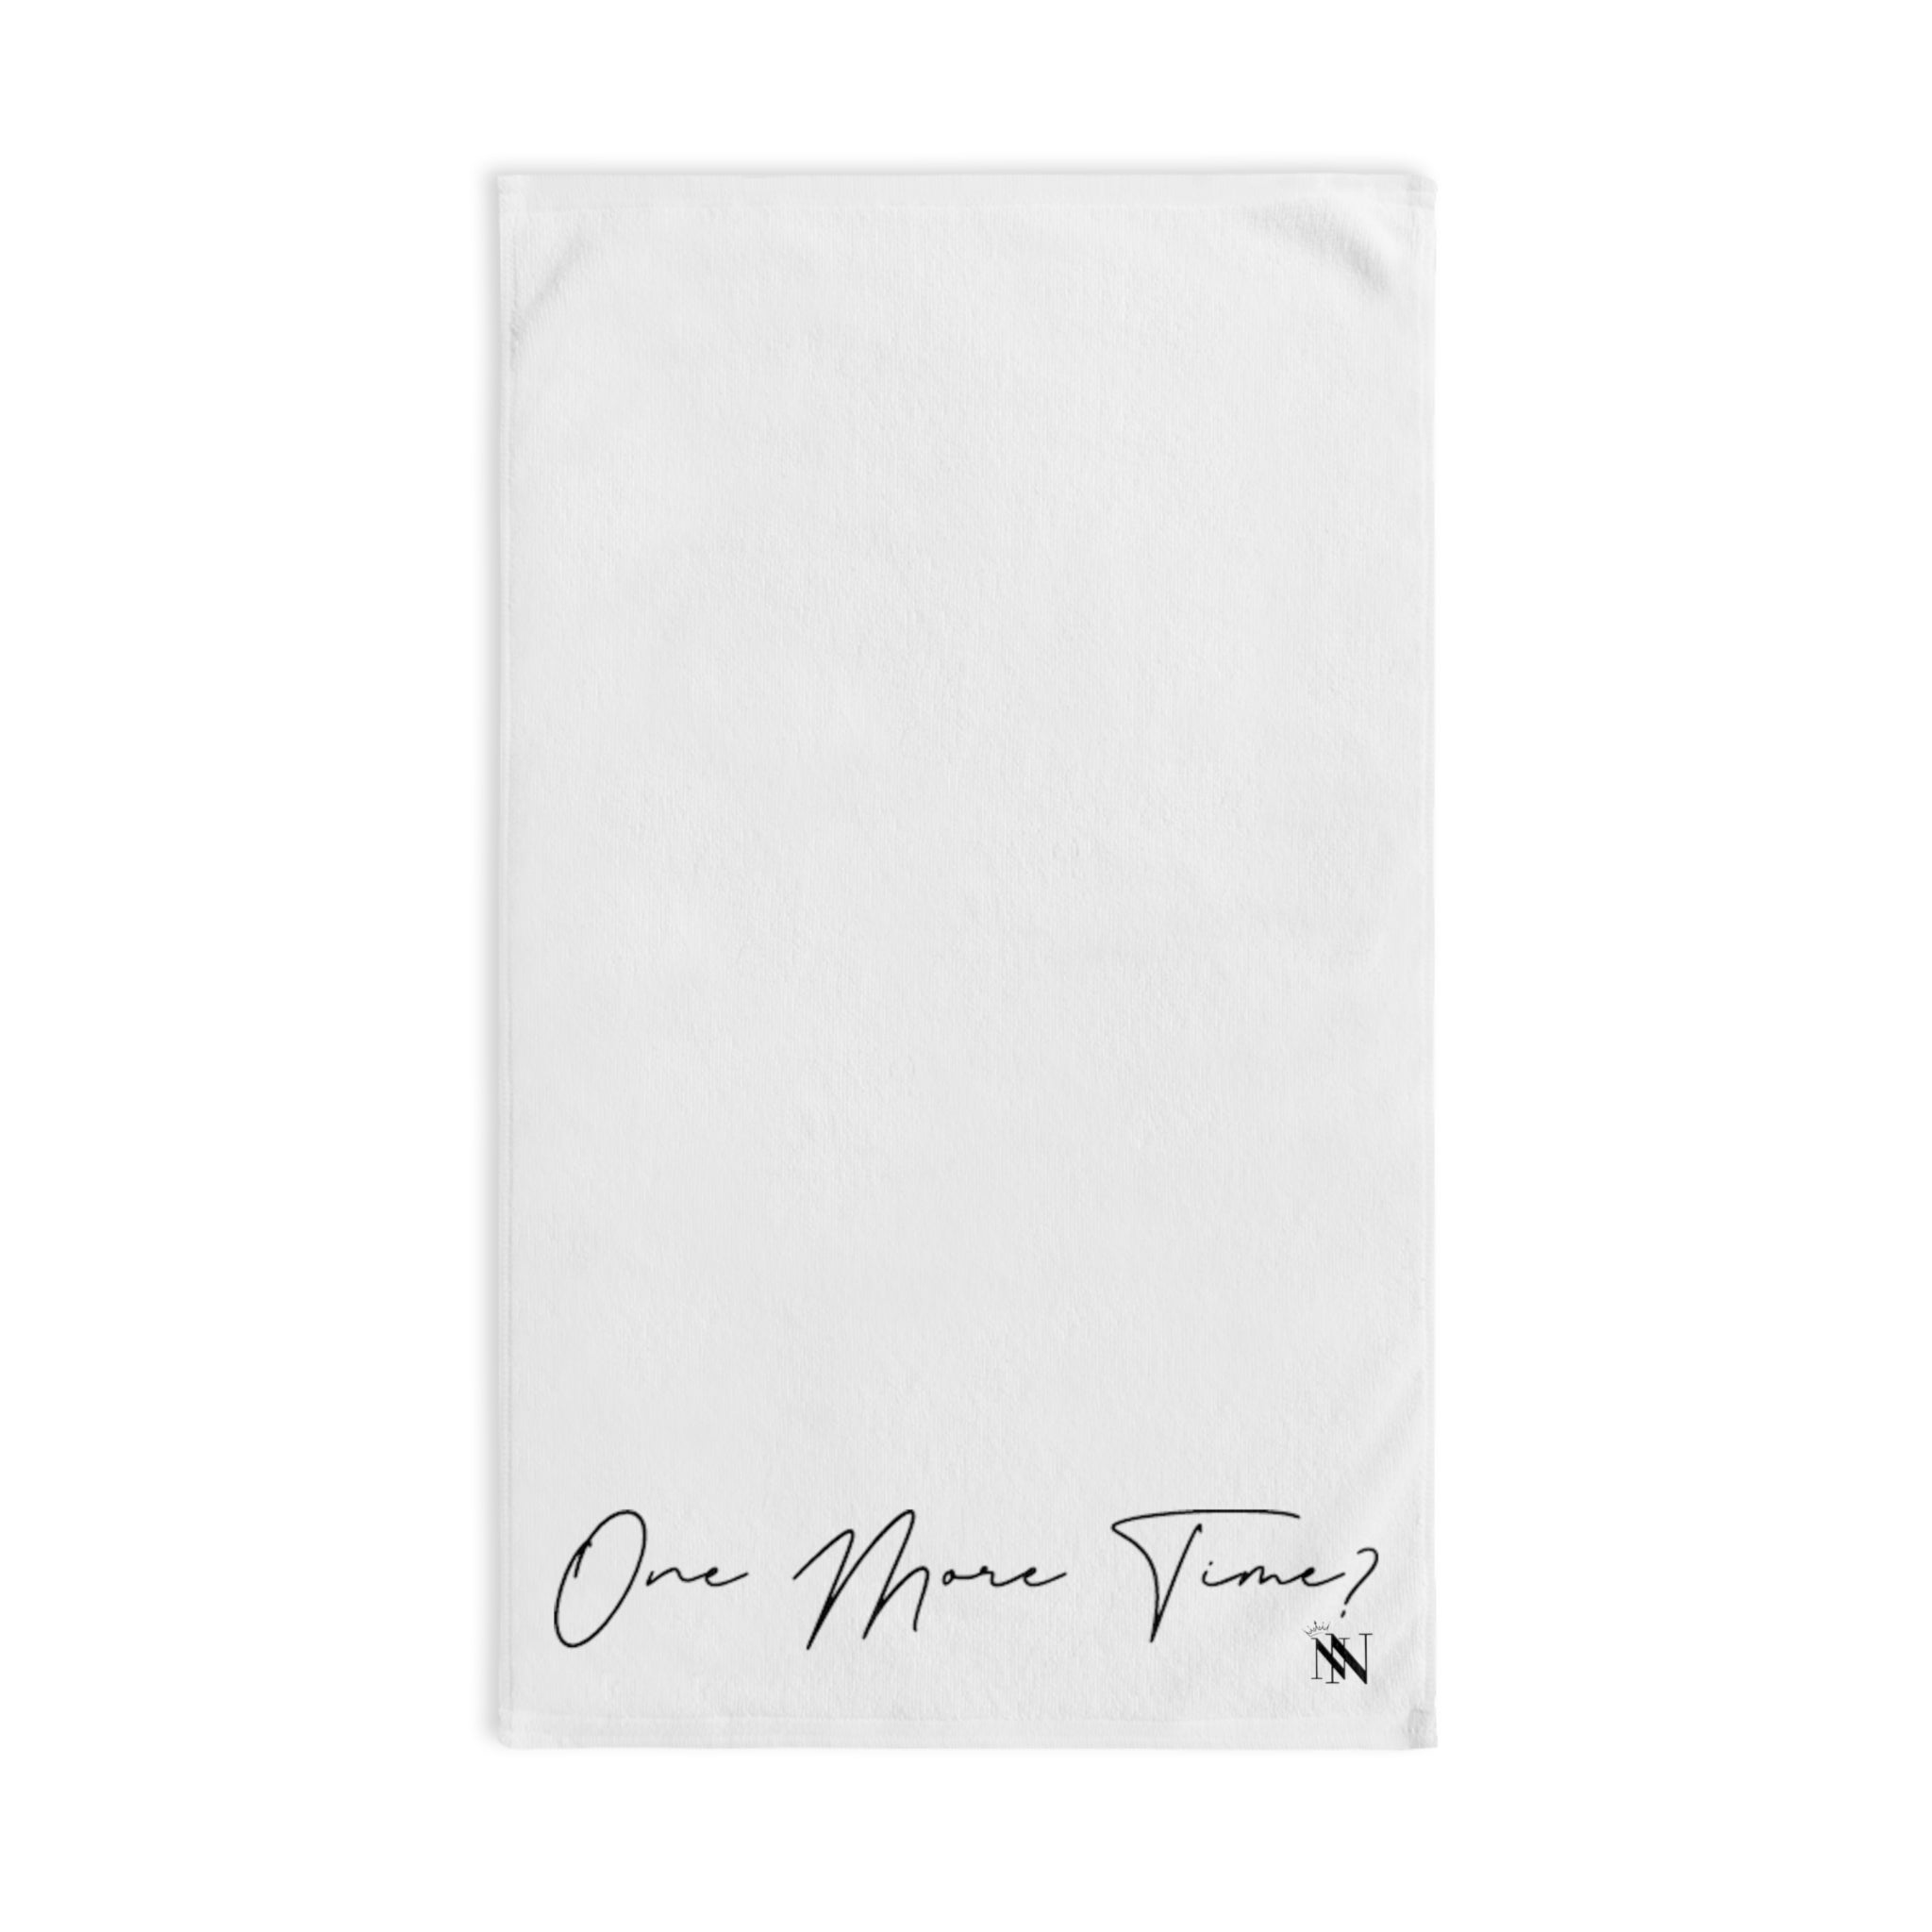 One More Time? White | Funny Gifts for Men - Gifts for Him - Birthday Gifts for Men, Him, Her, Husband, Boyfriend, Girlfriend, New Couple Gifts, Fathers & Valentines Day Gifts, Christmas Gifts NECTAR NAPKINS